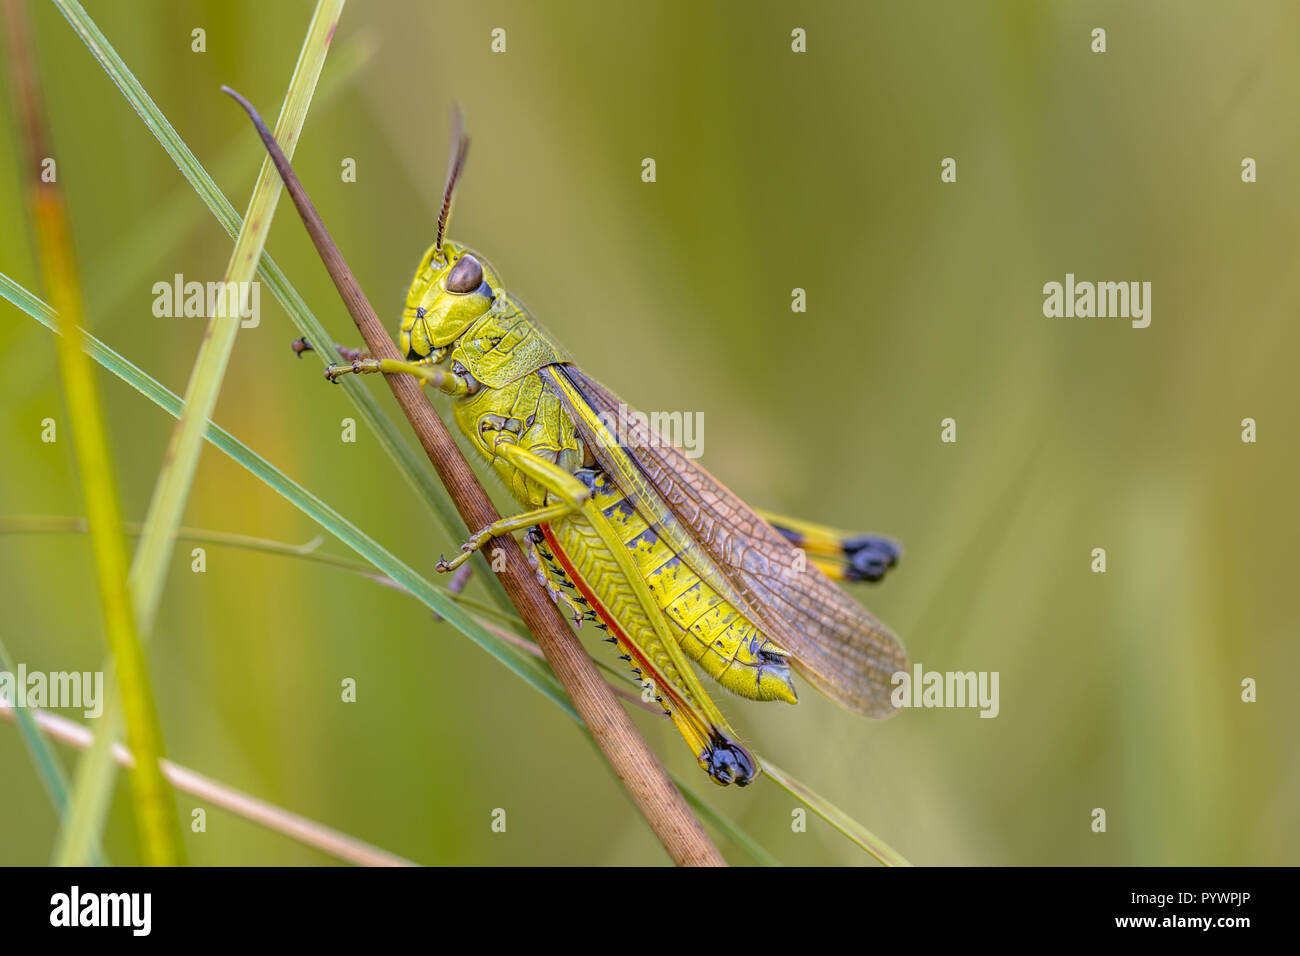 Rare Large marsh grasshopper (Stethophyma grossum). A threatened insect species typical for marshland and swamp habitats Stock Photo